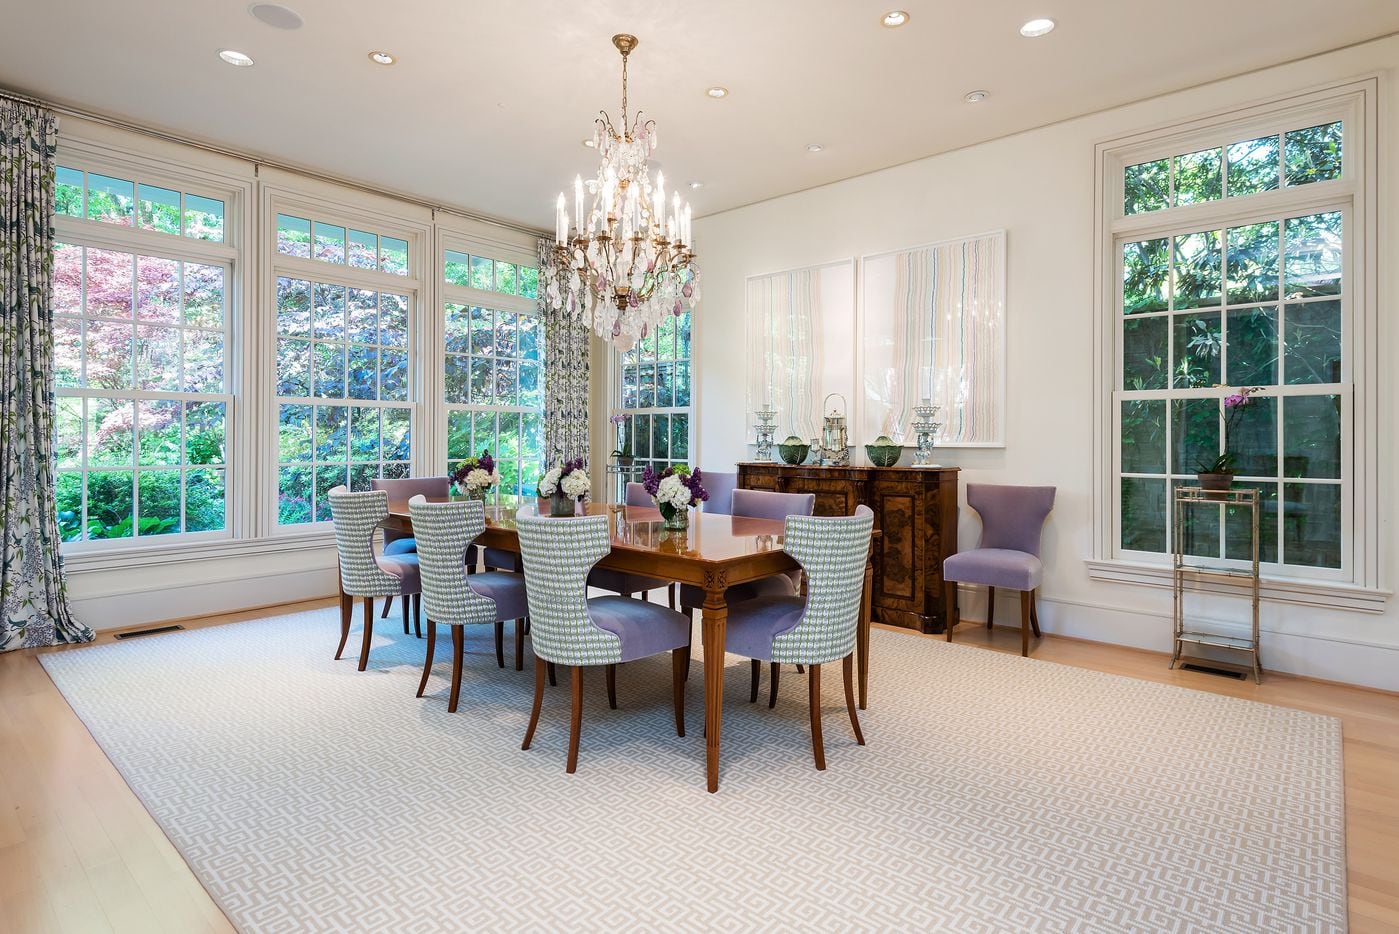 Take a look a
t the formal dining room at 9024 Broken Arrow Lane in Dallas.